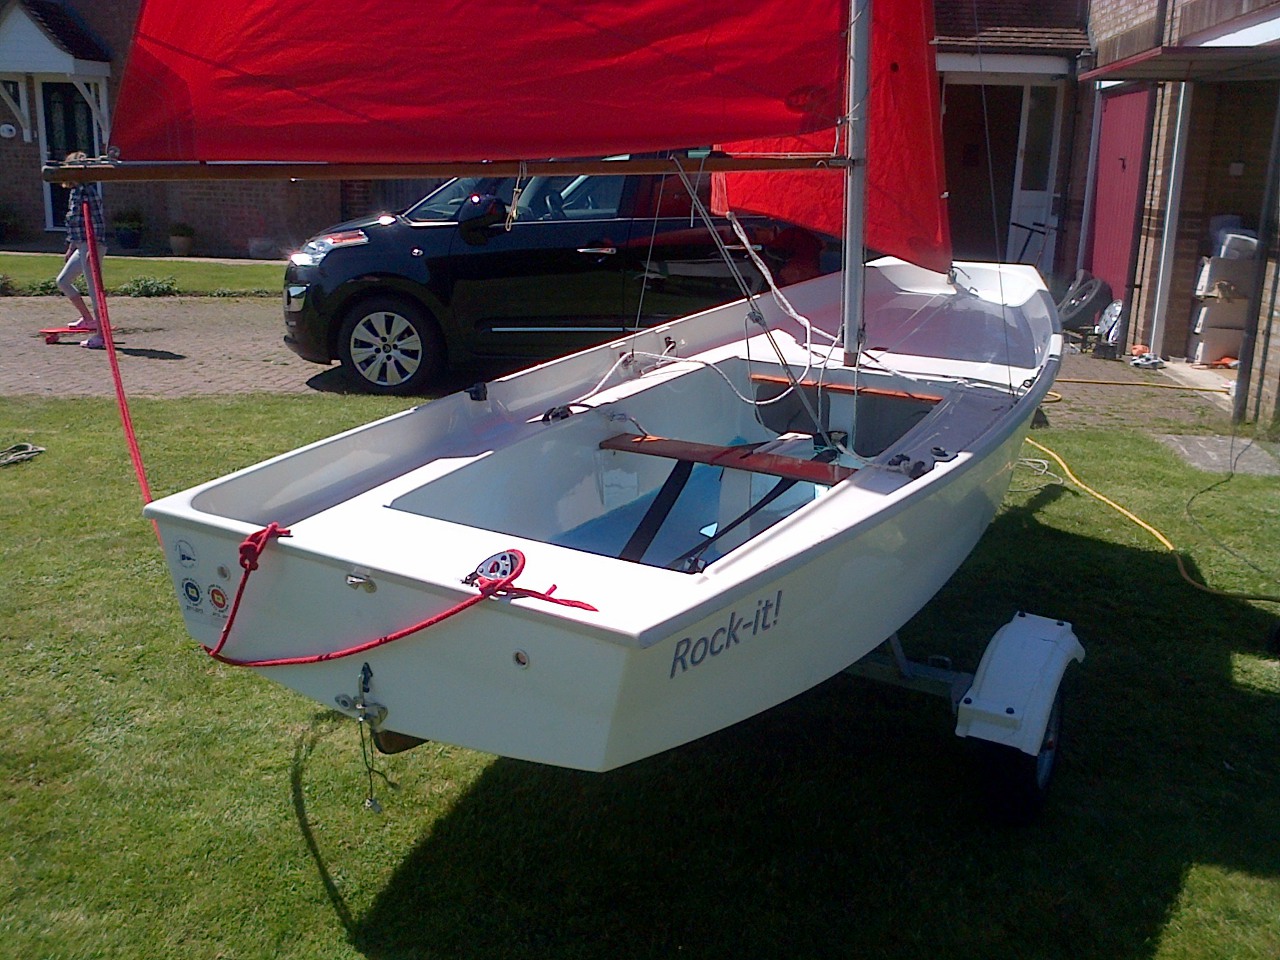 What is thought to be a Holt GRP Mirror dinghy rigged up on a lawn